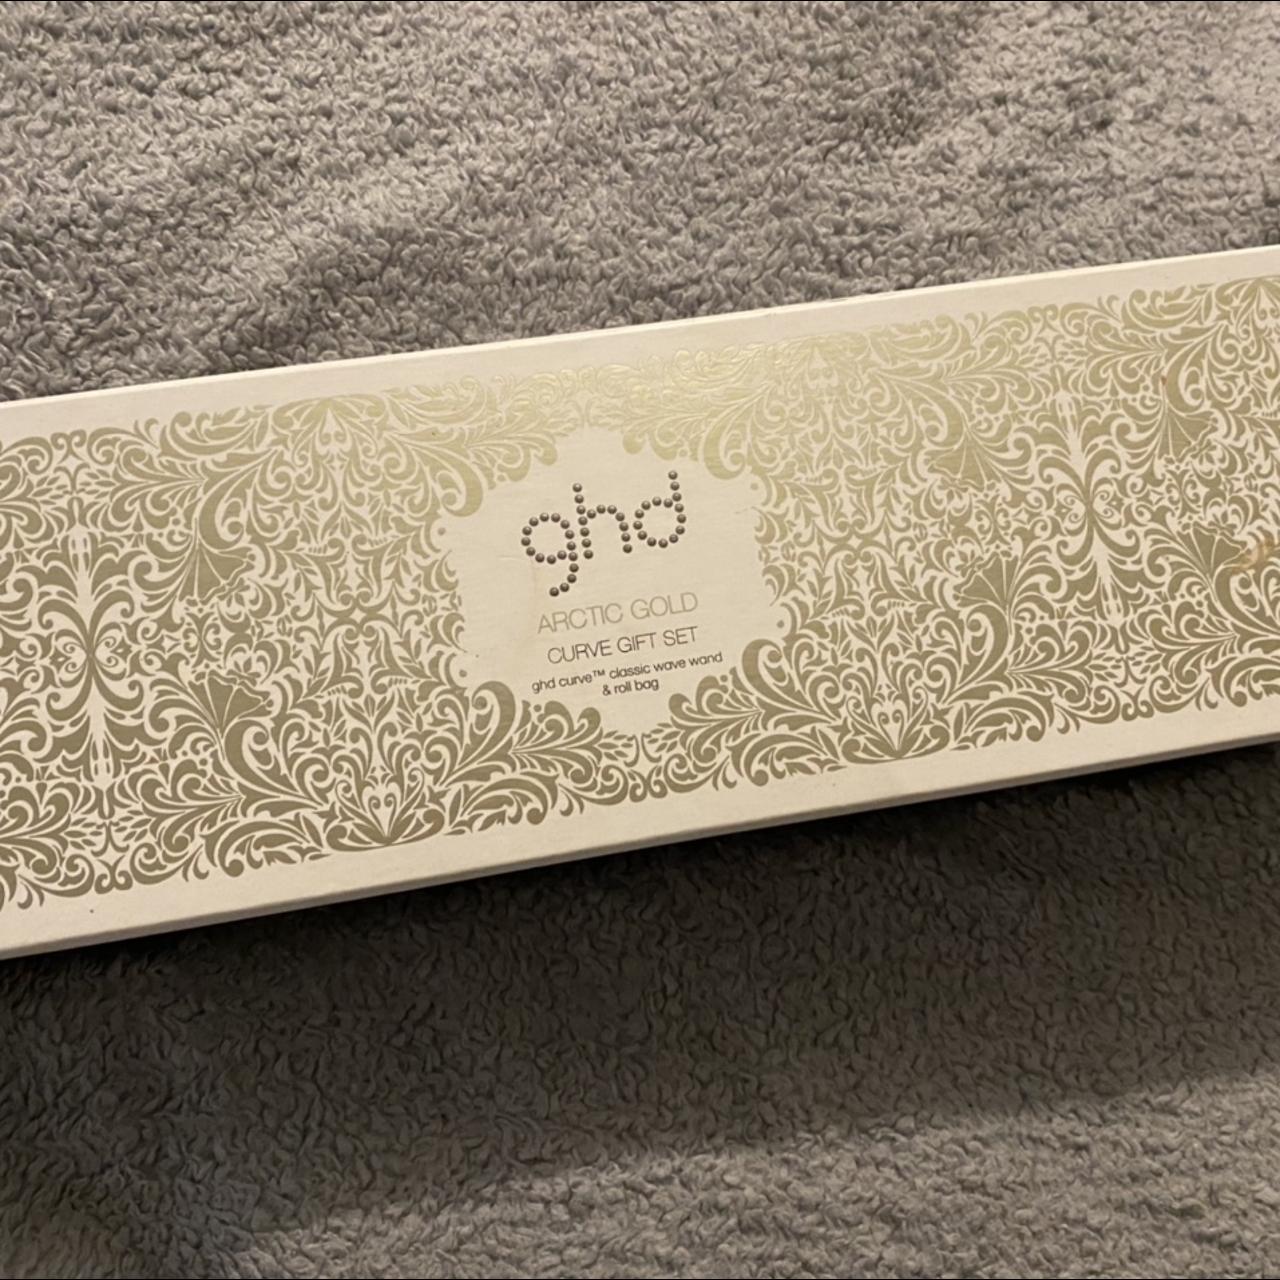 Coffret deluxe ghd arctic gold